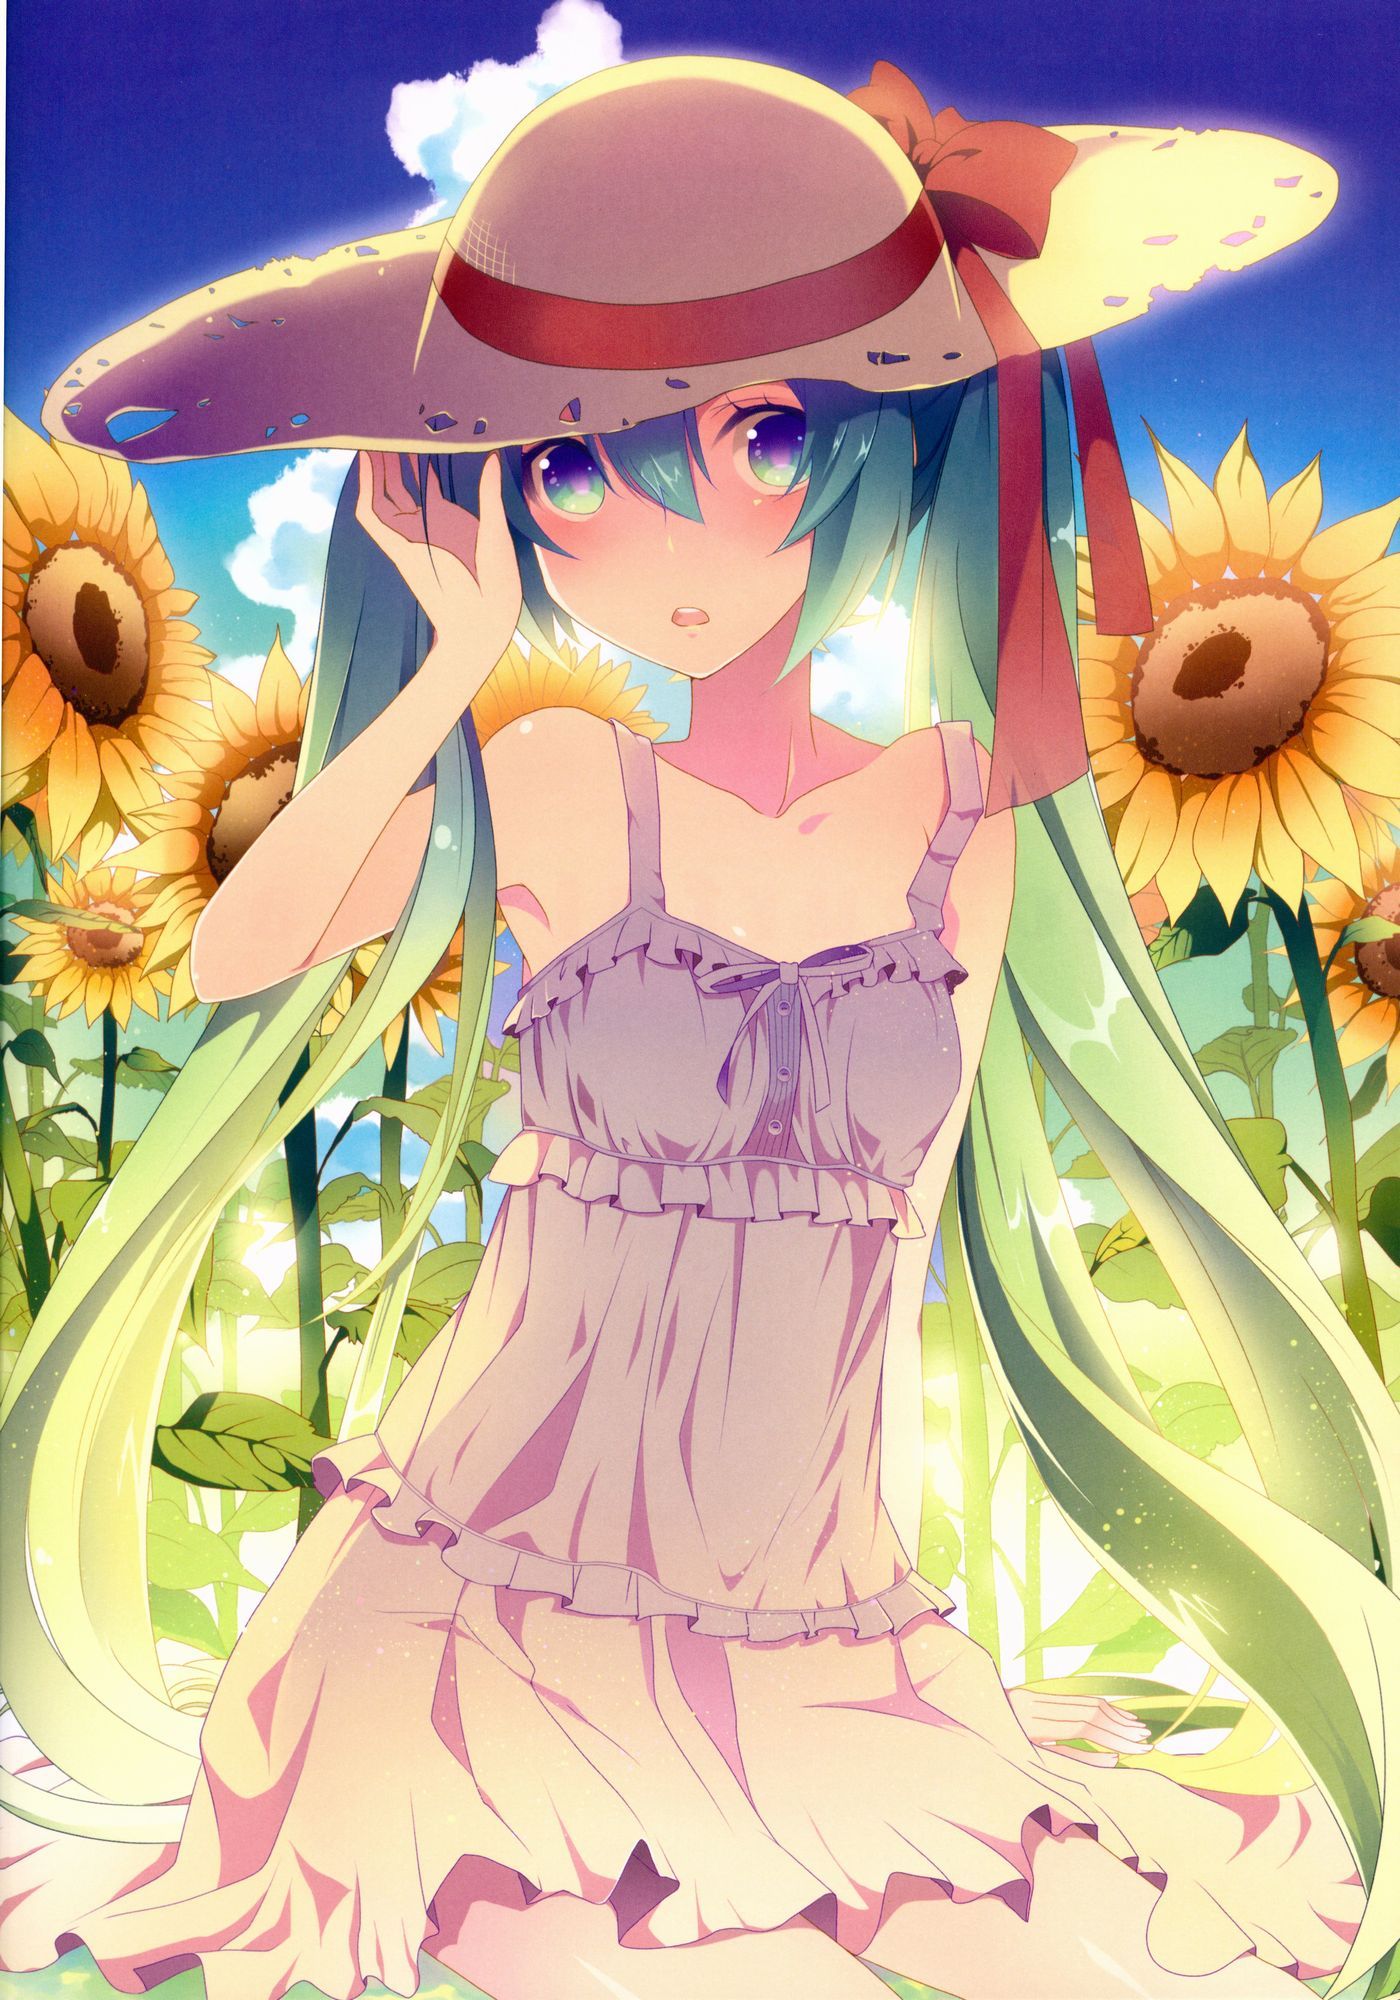 [Secondary, ZIP] summer 2: girl with a sunflower or image summary 1